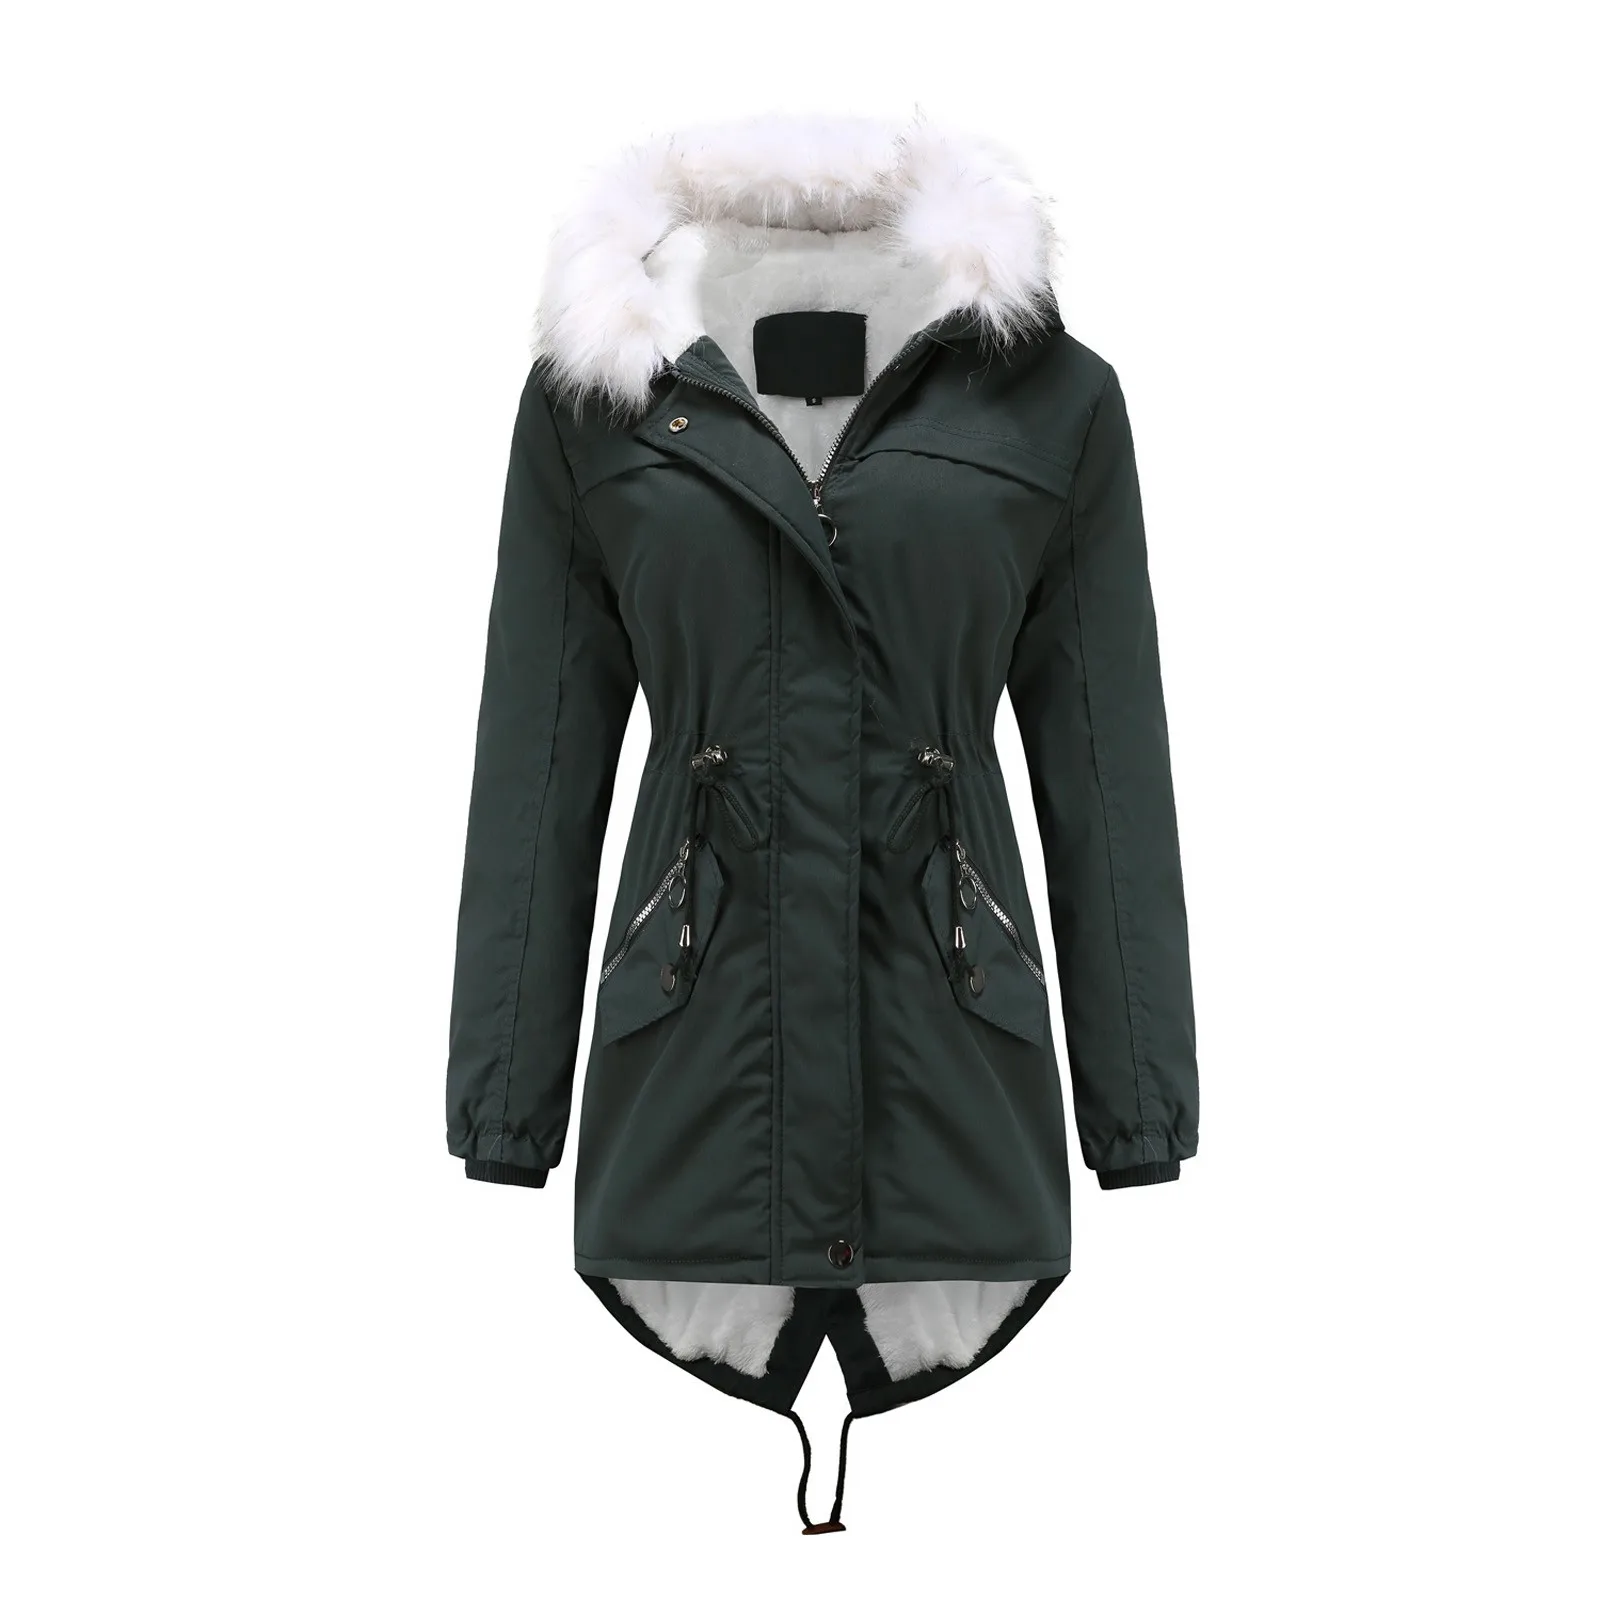 

Women Warm Coat Jacket Outwear Fur Lined Trench Winter Hooded Thick Overcoat Winter Plus Size Female Jackets Chaquetas Mujer